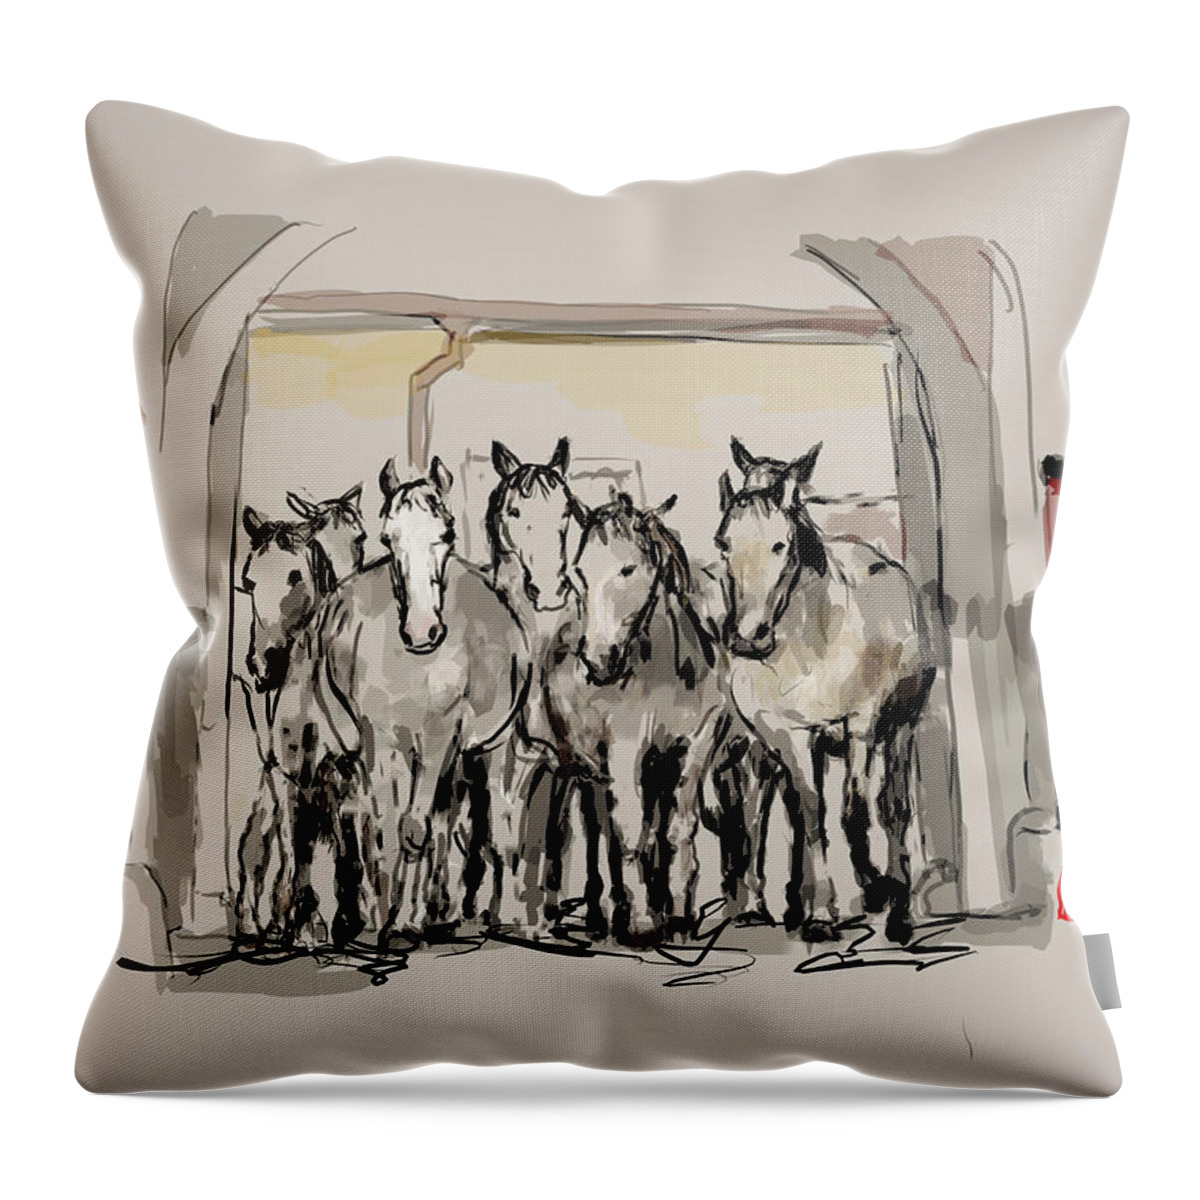 Horses. Kladruber  Throw Pillow featuring the digital art The Kladrubers by Debbi Saccomanno Chan